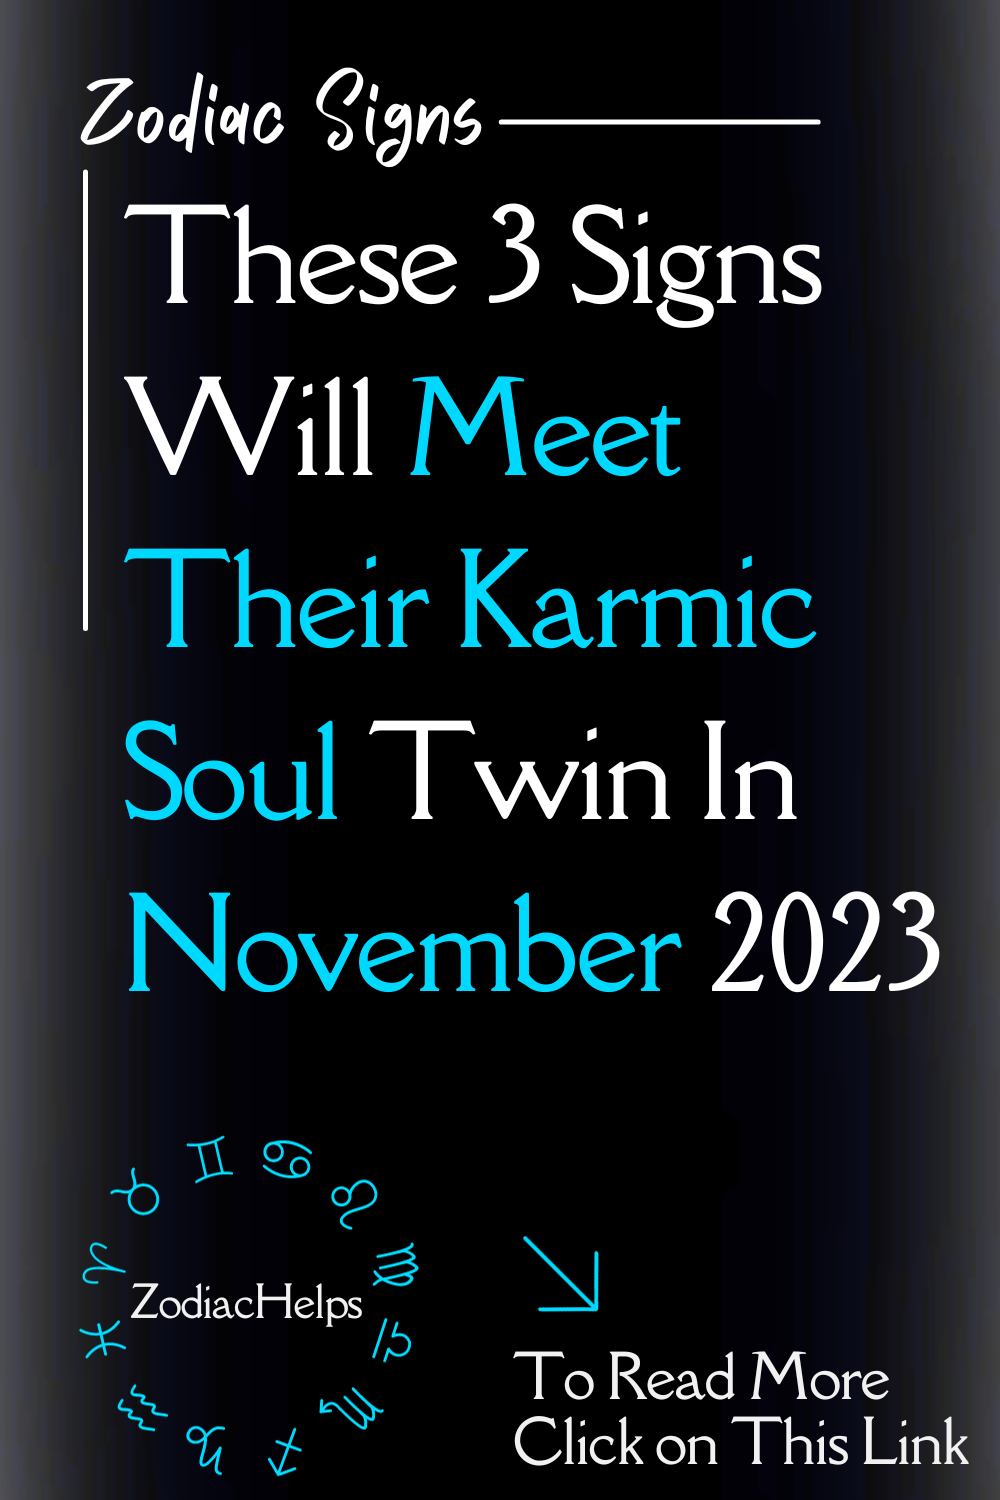 These 3 Signs Will Meet Their Karmic Soul Twin In November 2023